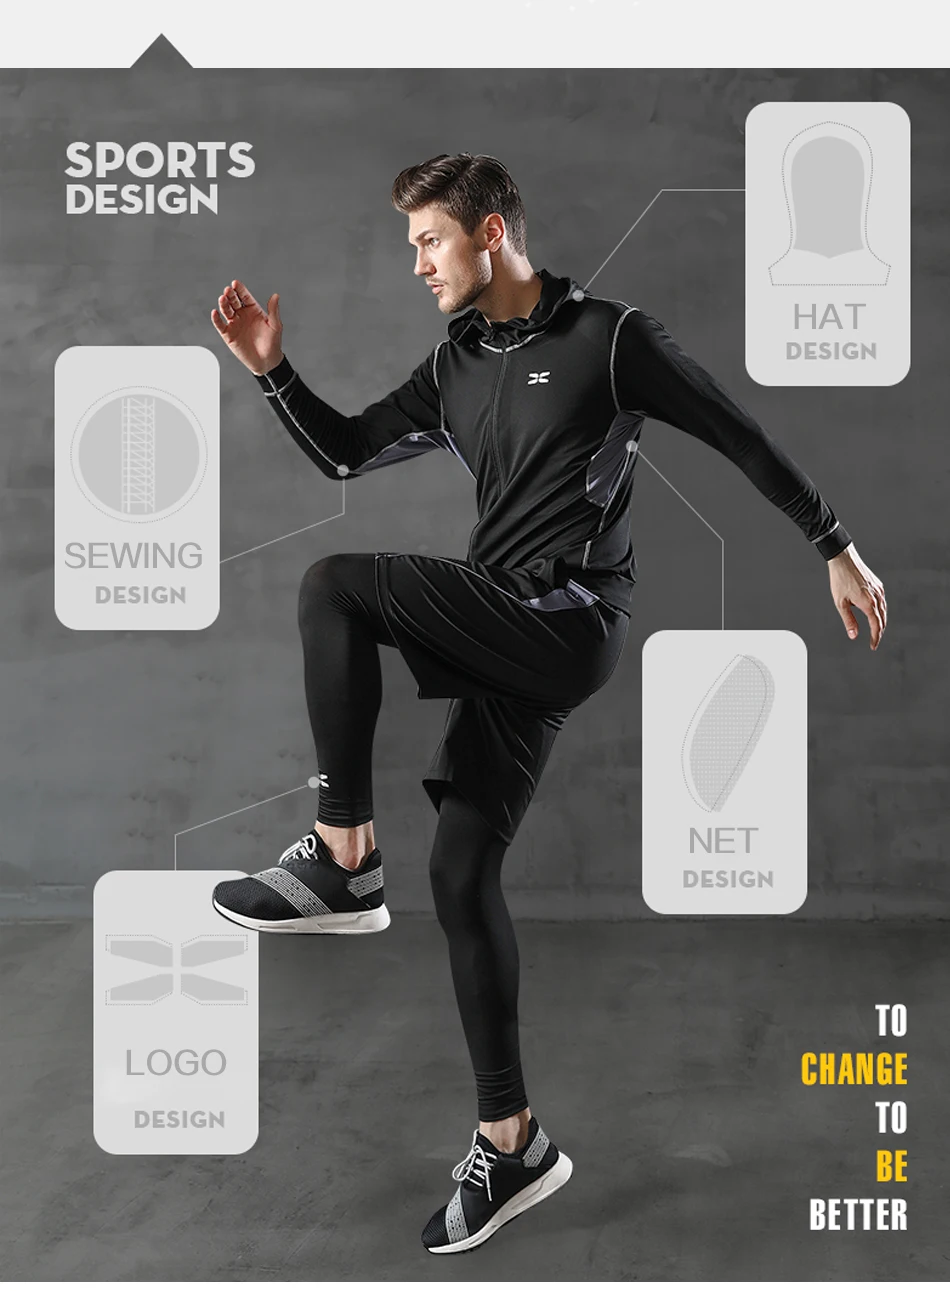 Mens Compression Workout Set WholeFitness Gym Wear Tracksuit With